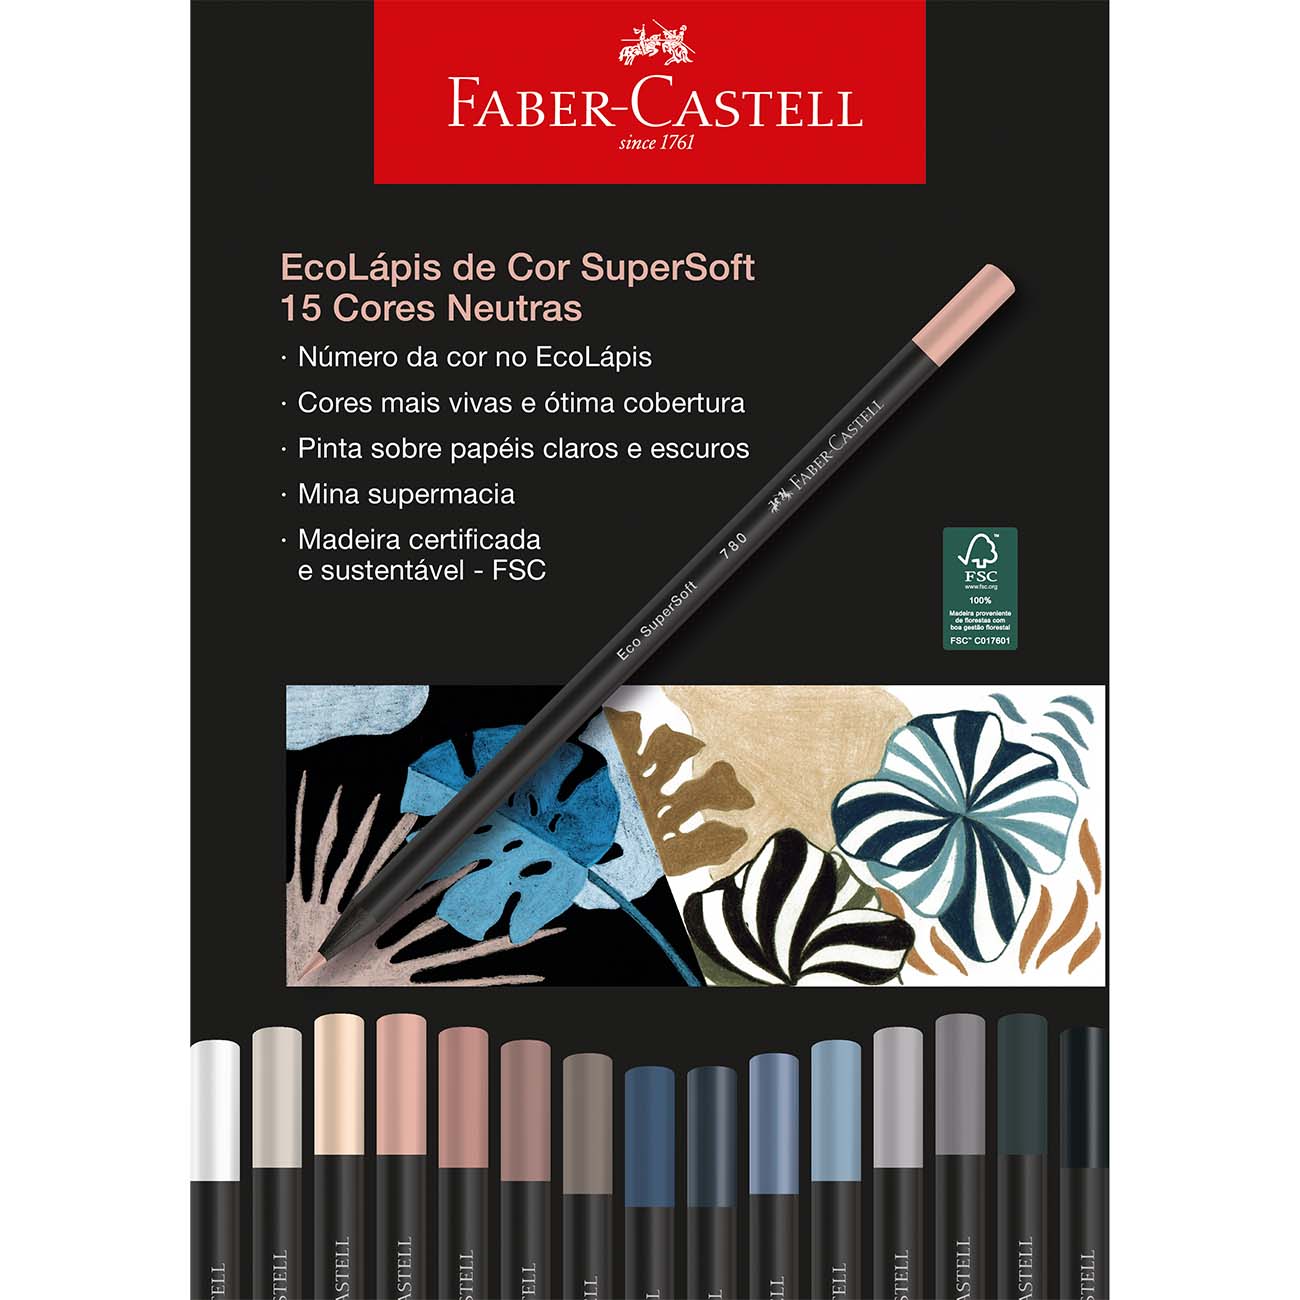 Ecolpis Faber-Castell Supersoft 15 Cores Neutras